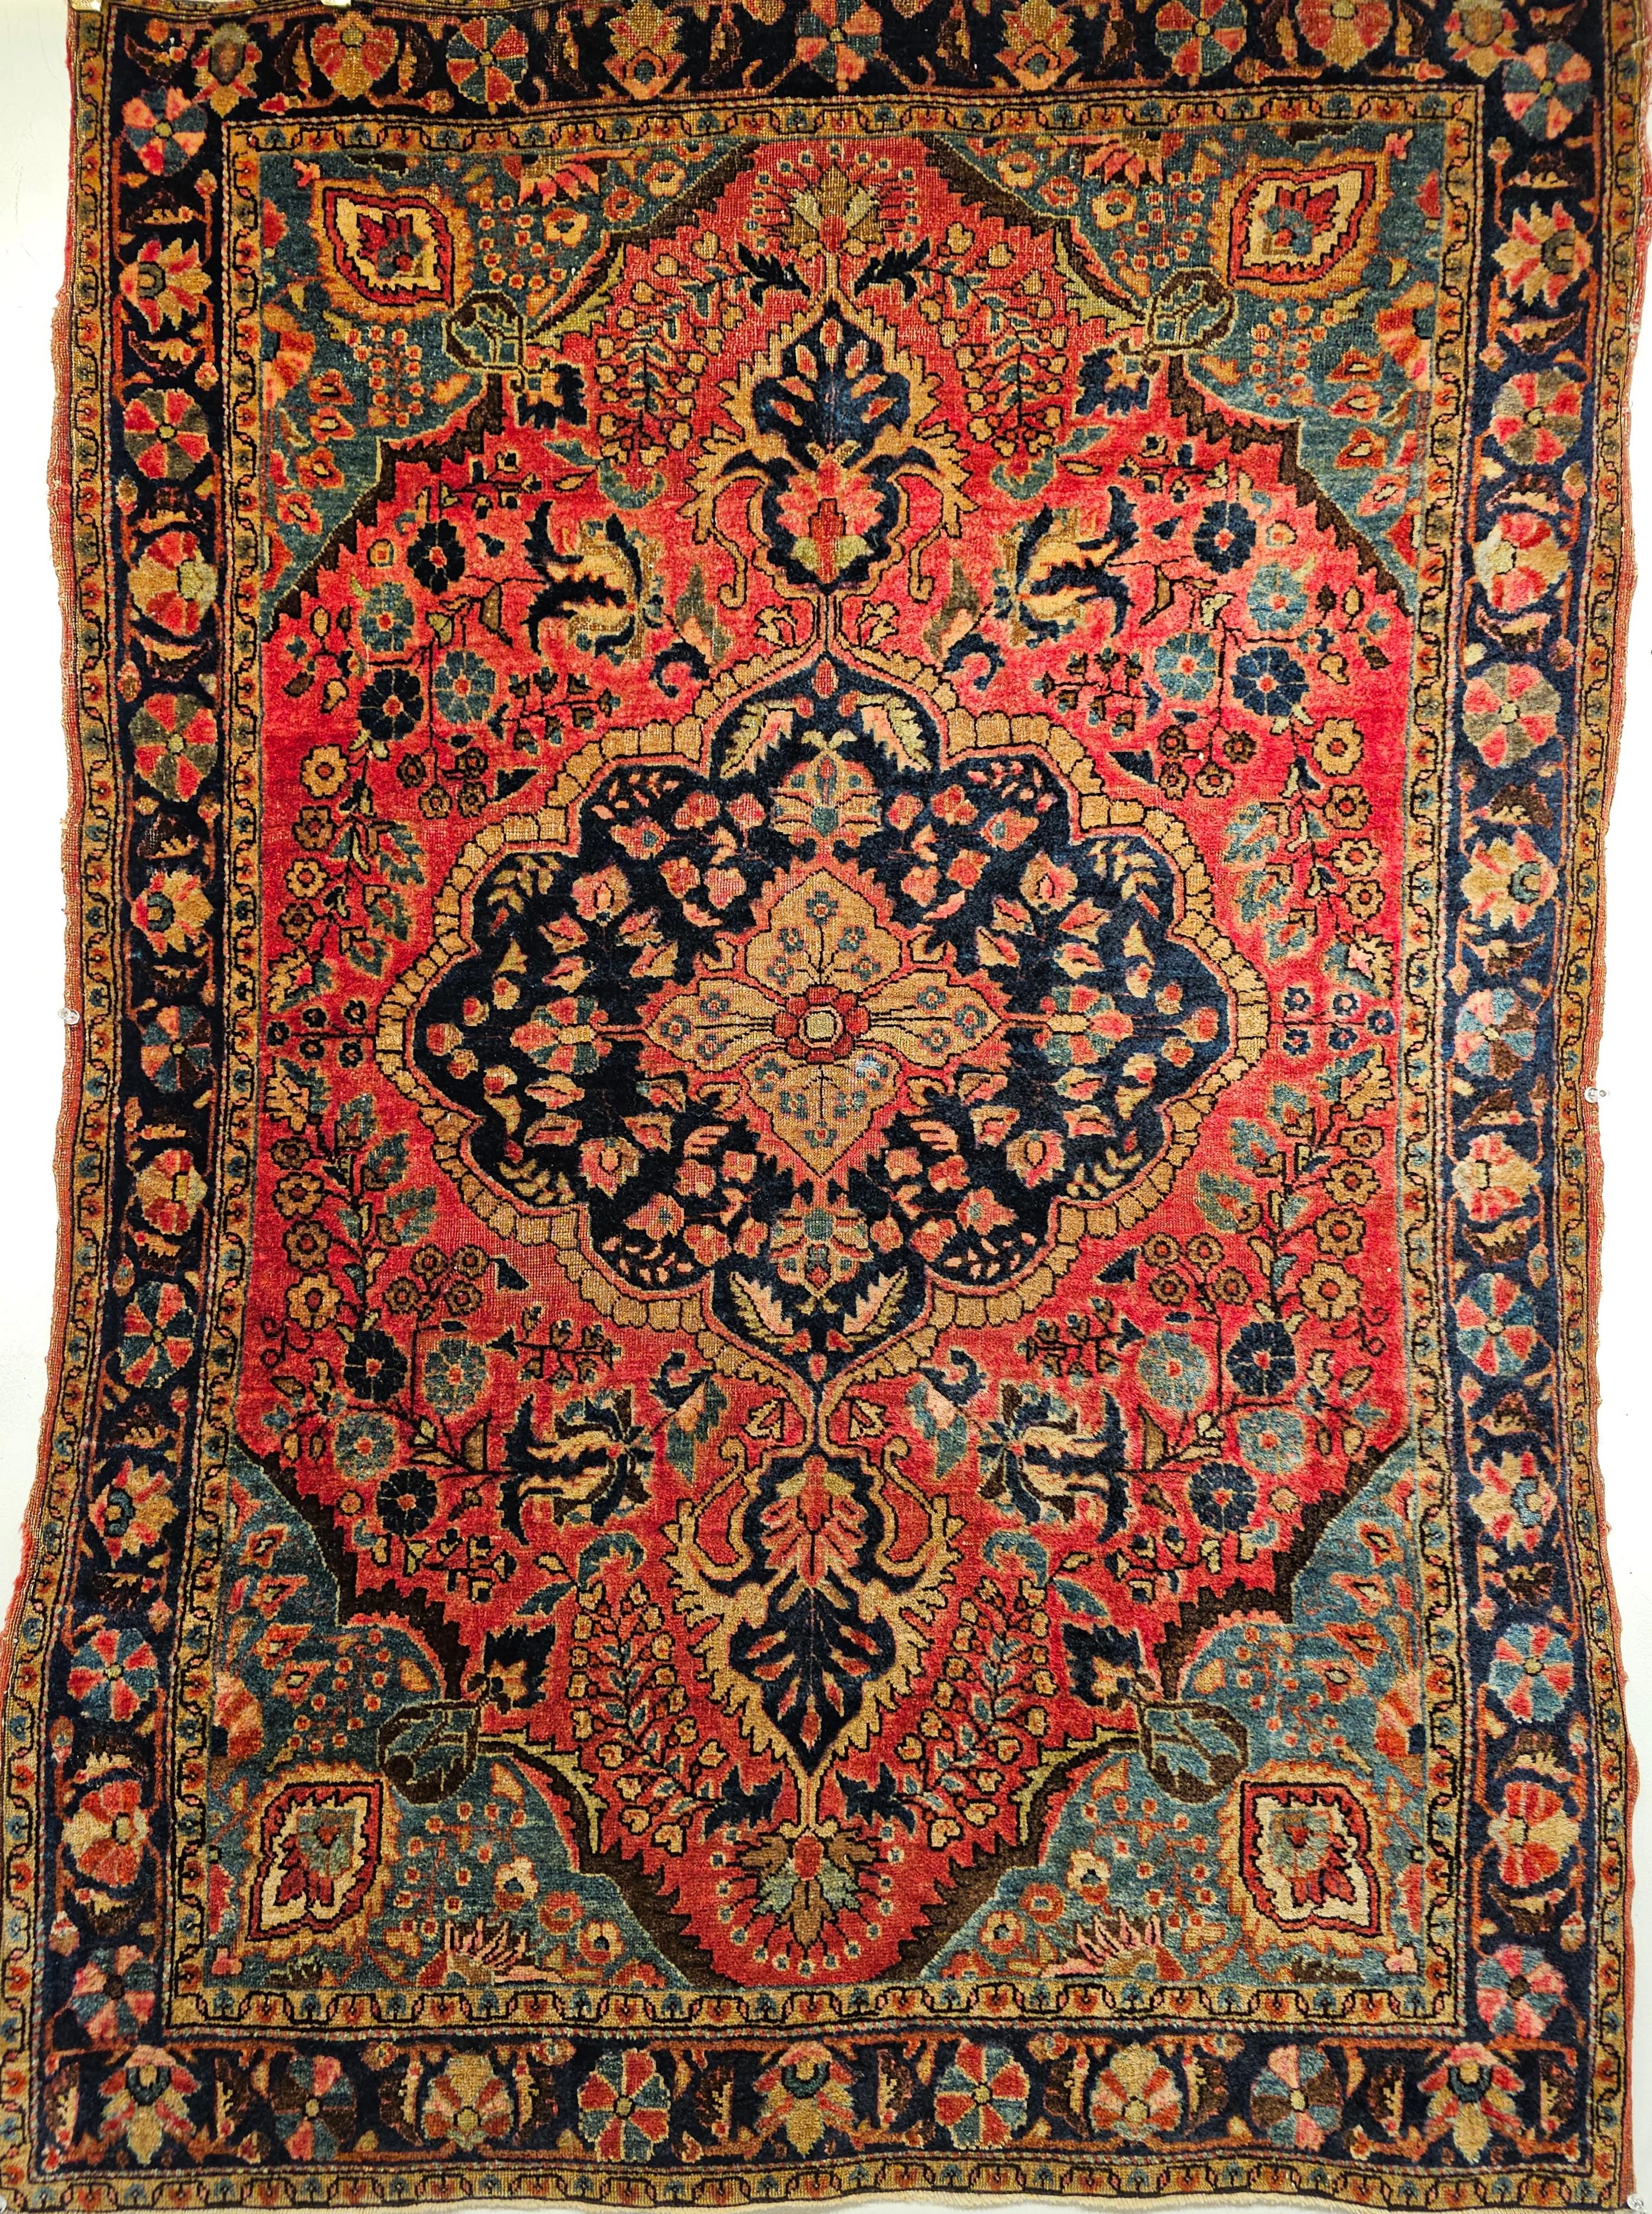 A wonderful small Sarouk area rug from the 1st quarter of the 1900s. The rug has a floral design set in a red color field with flowers and leaves in green, blue, red, yellow, and pink colors. The rug has a central medallion and its border in navy